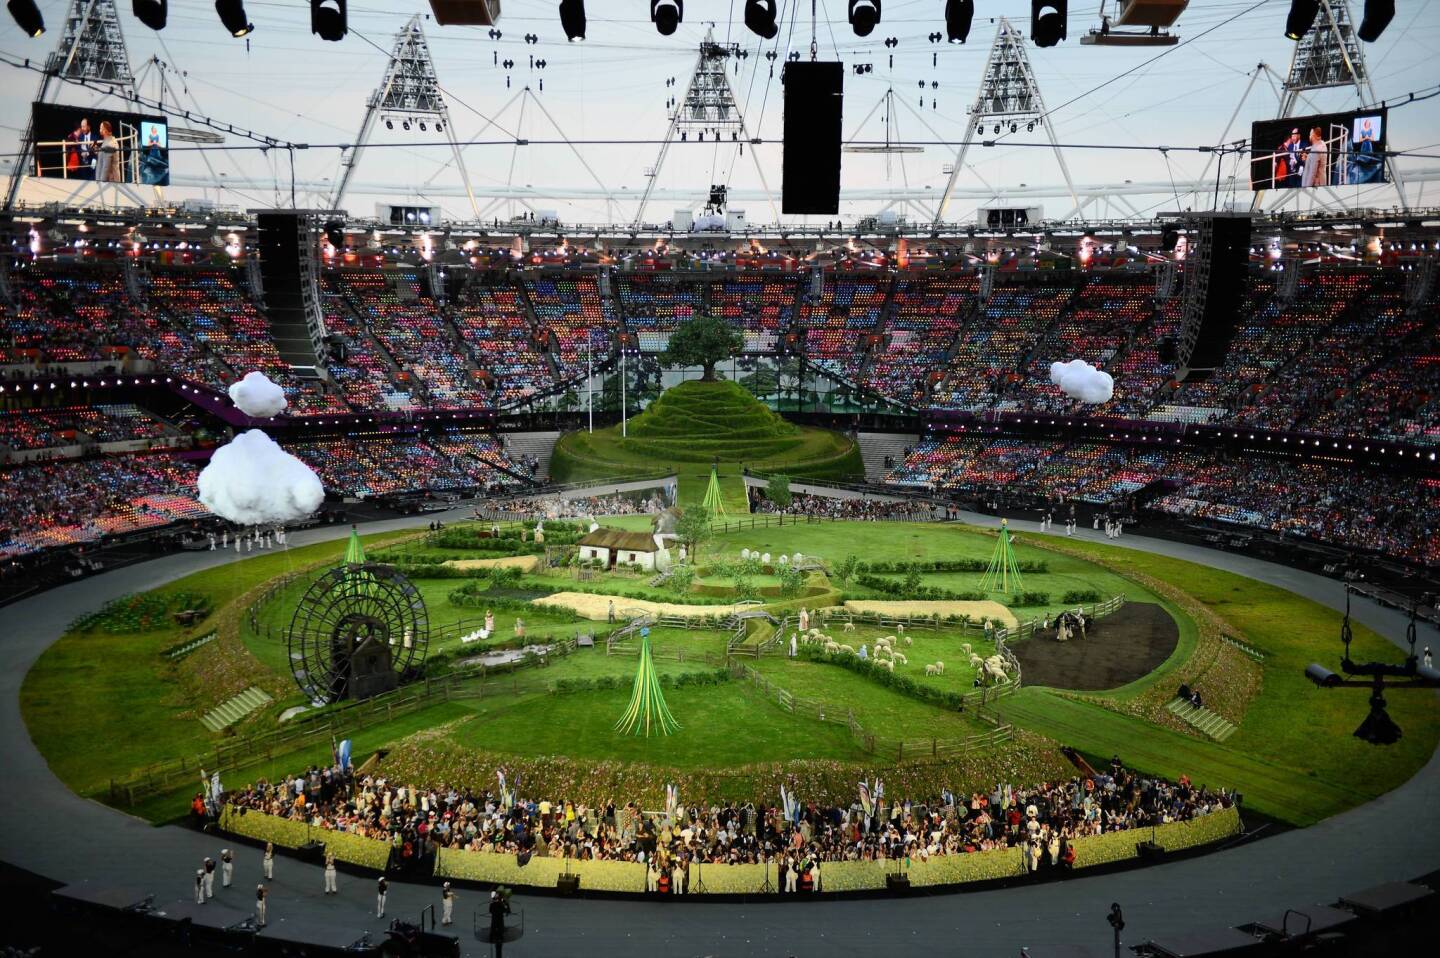 The stadium is is set with a British meadow scene for the opening ceremony of the London 2012 Olympic Games at the Olympic stadium in London.